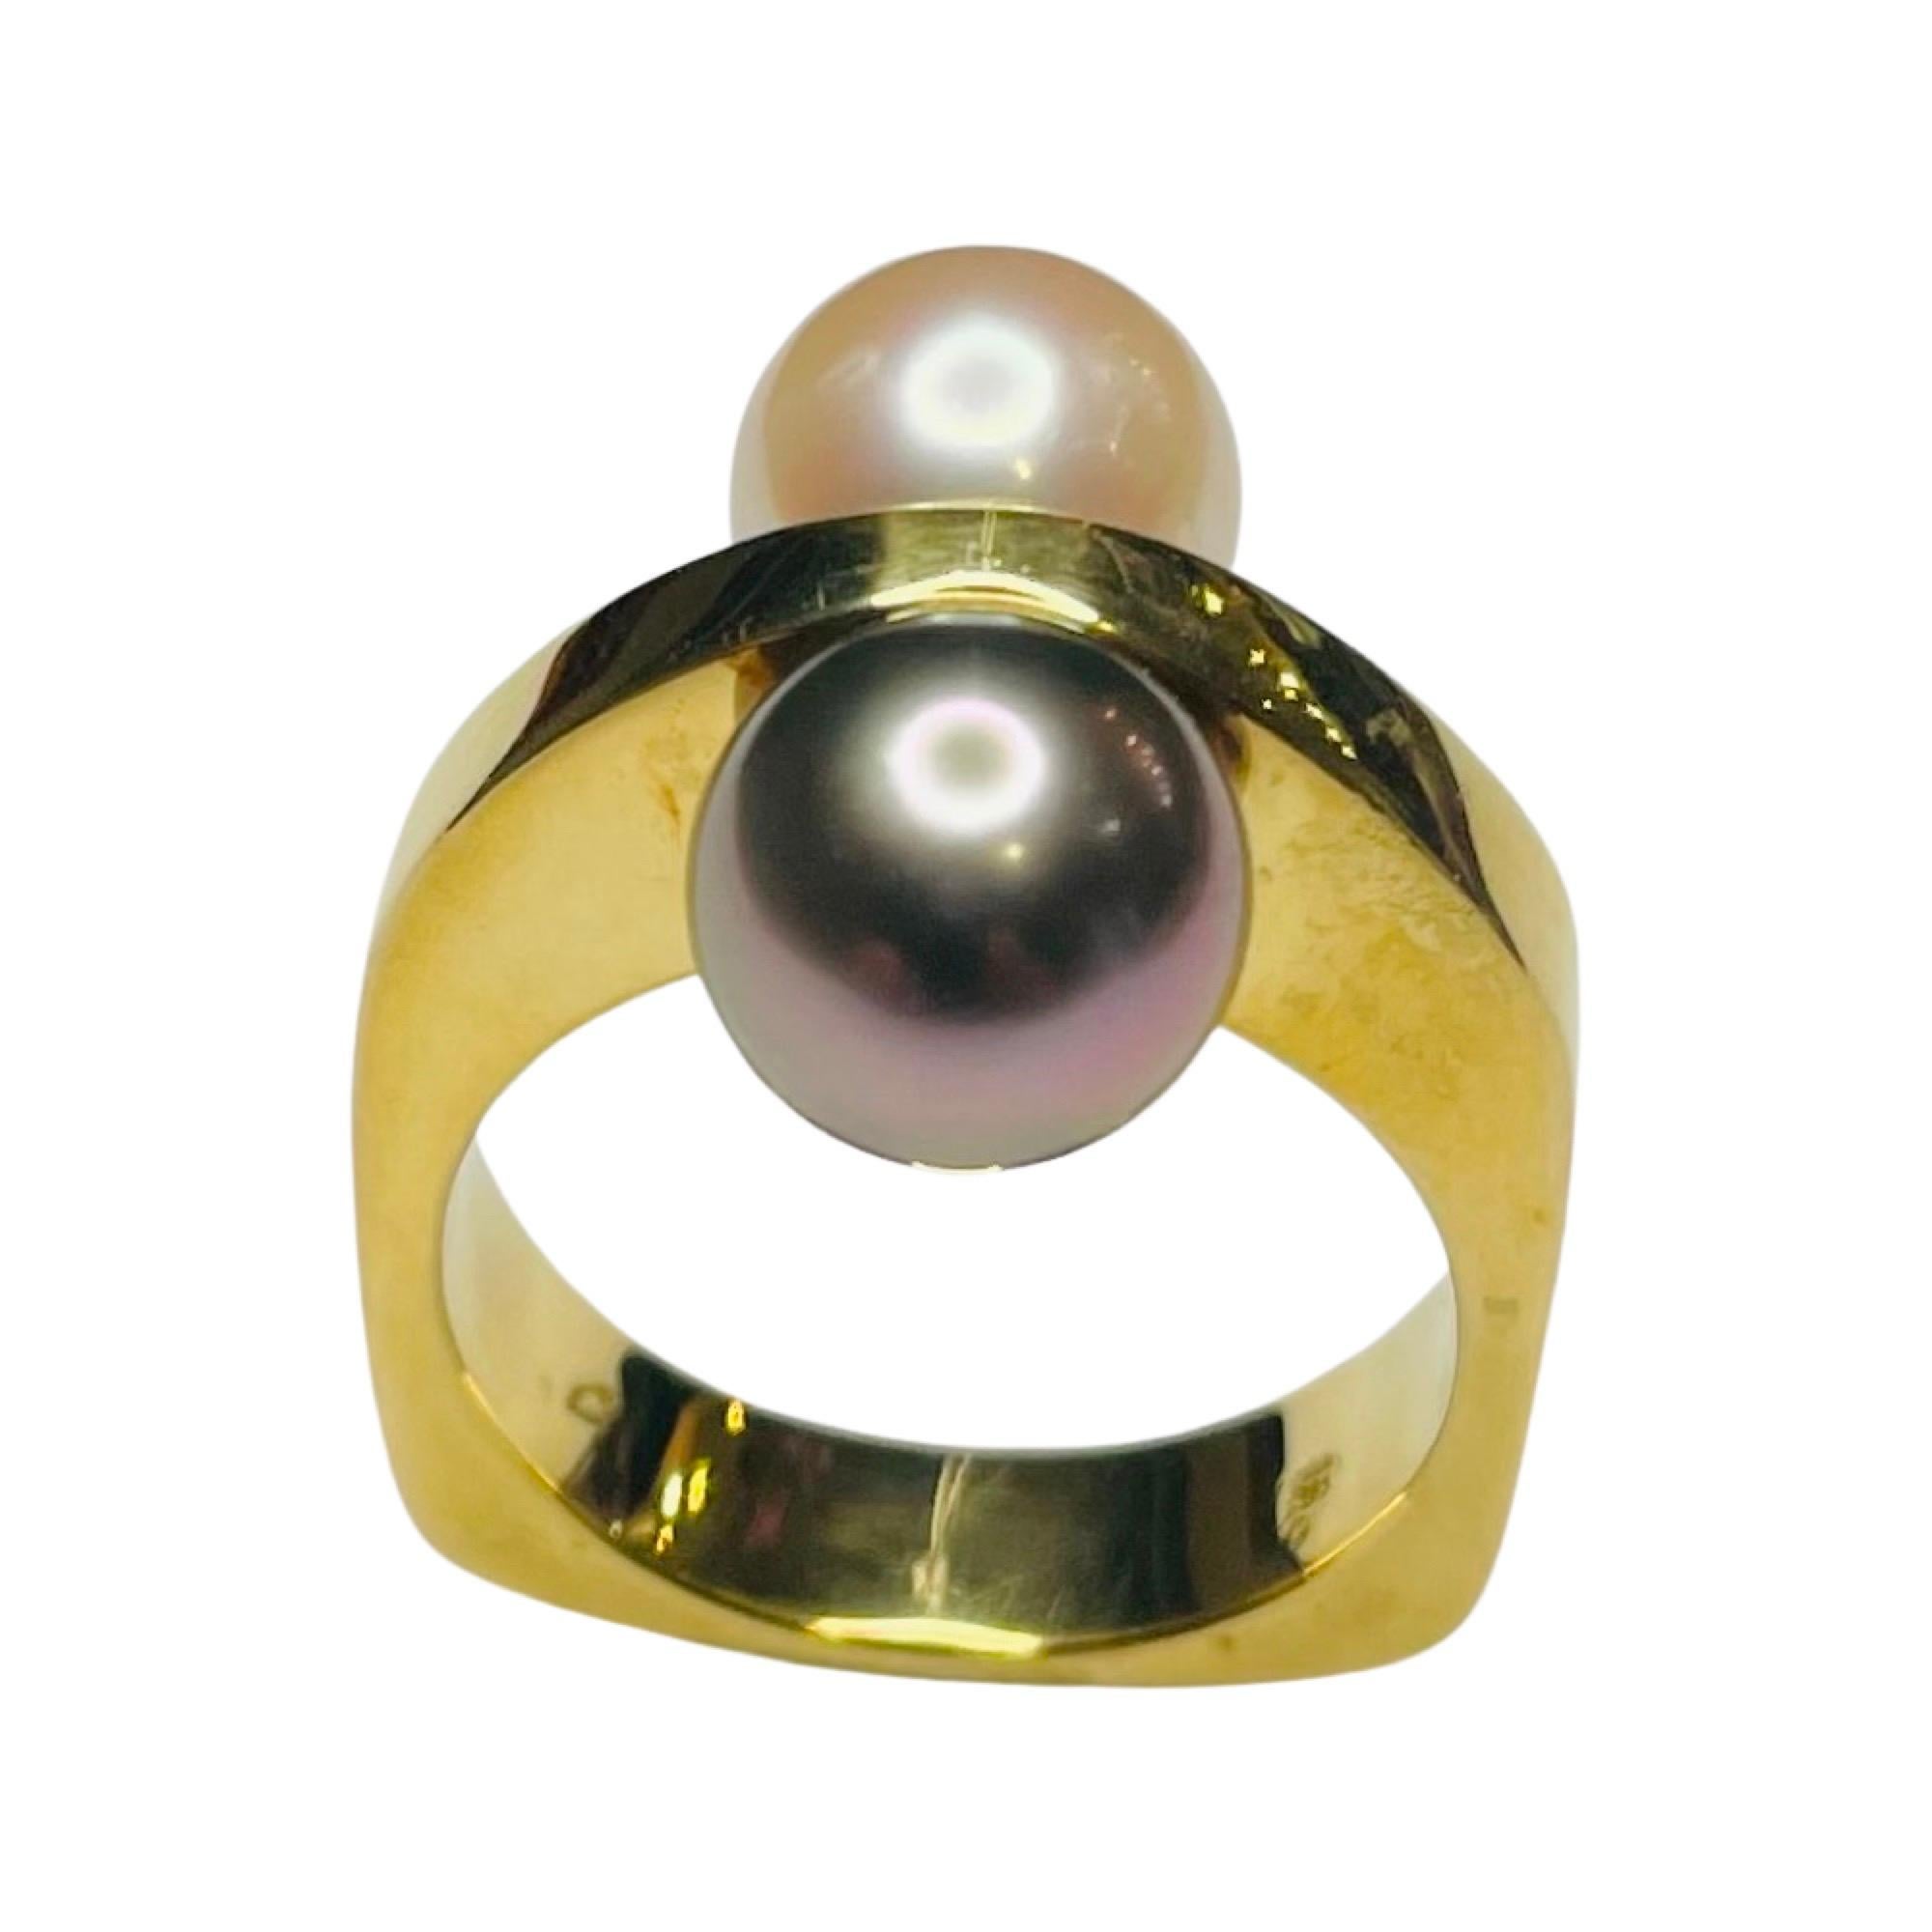 Lithos 18K Yellow Gold Cultured Natural Color Black Tahitian Pearl and White Japanese  Akoya Pearl Ring. The Black Tahitian pearl is 8.89 mm. This pearl is round with slight blemishes and a rose/poe rava overtone. The Akoya pearl is 8.52 mm. This